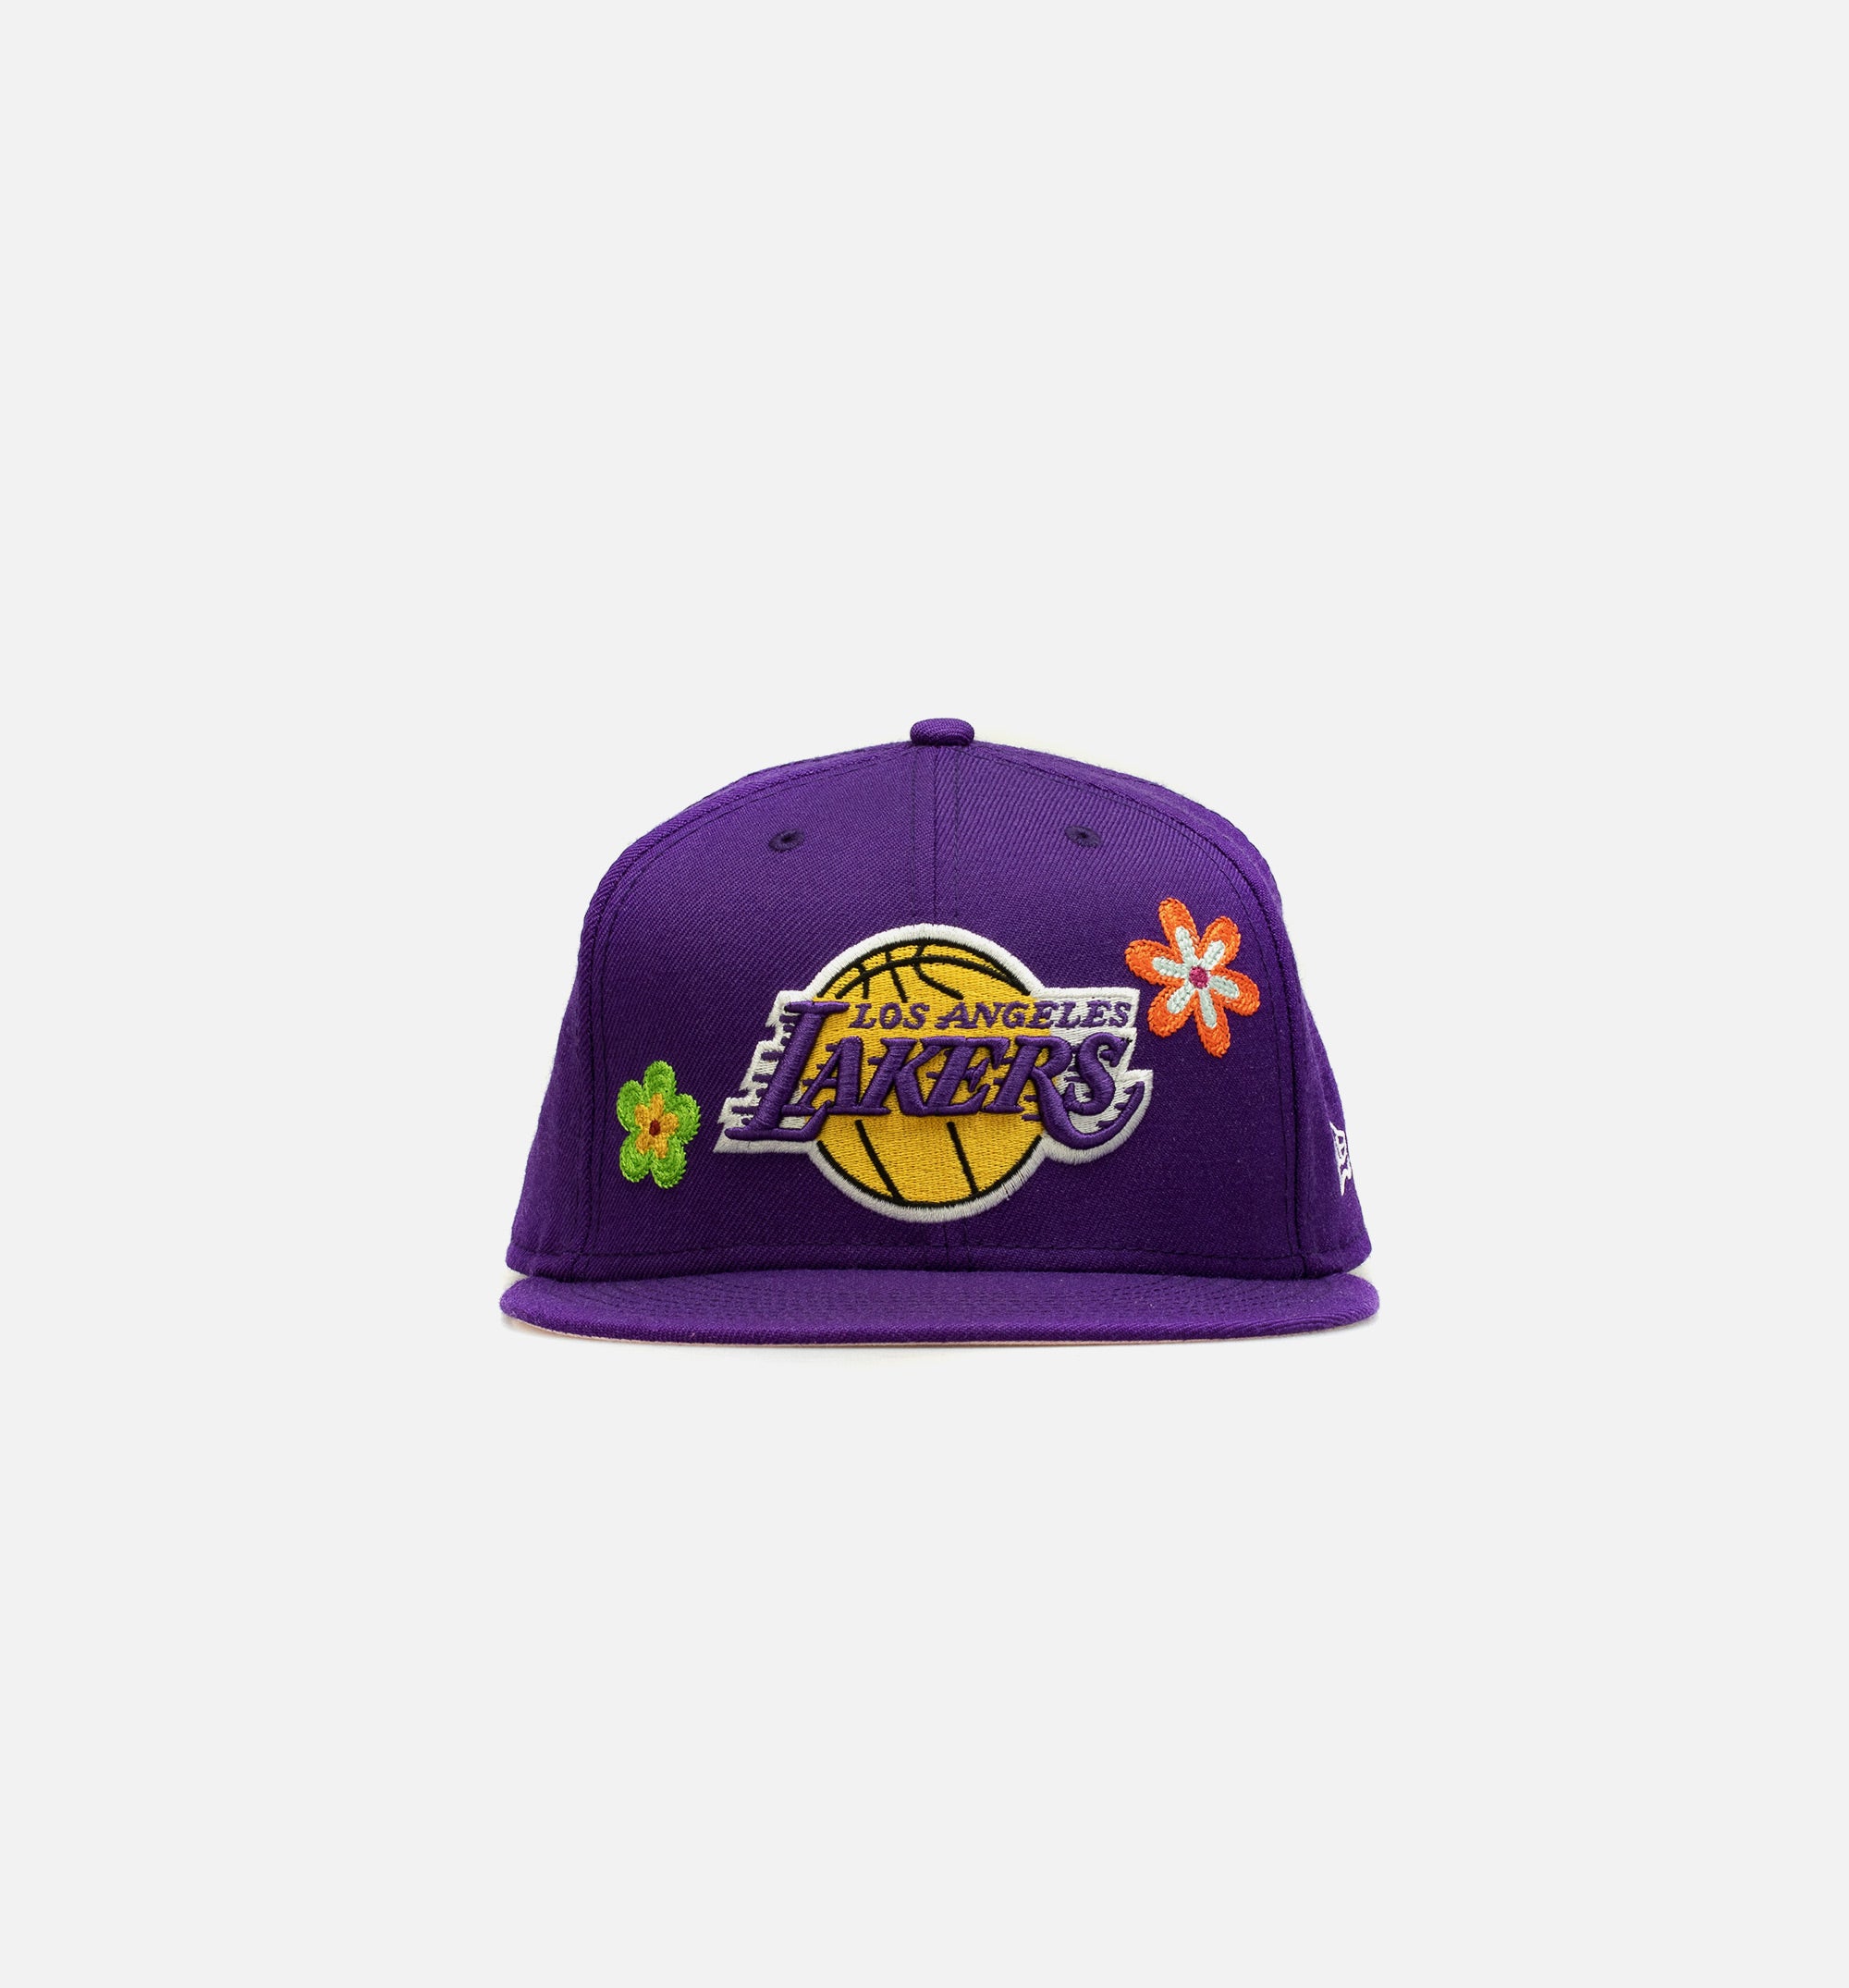 New Era Los Angeles Lakers 59Fifty Fitted Cap Mens Hat Purple